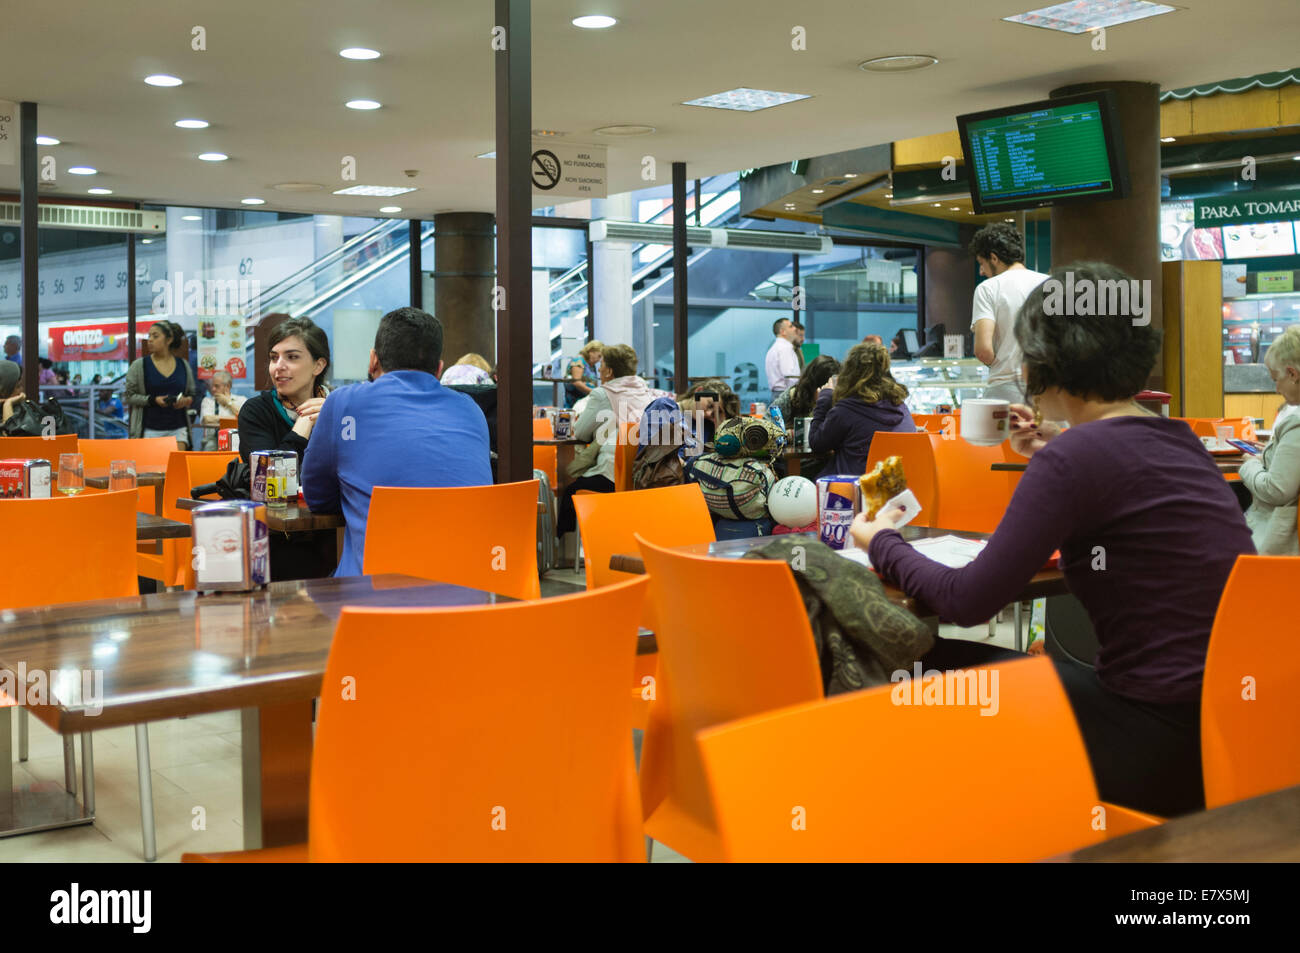 People at a cafeteria at Mendez Alvaro South Station, Madrid, Spain Stock Photo